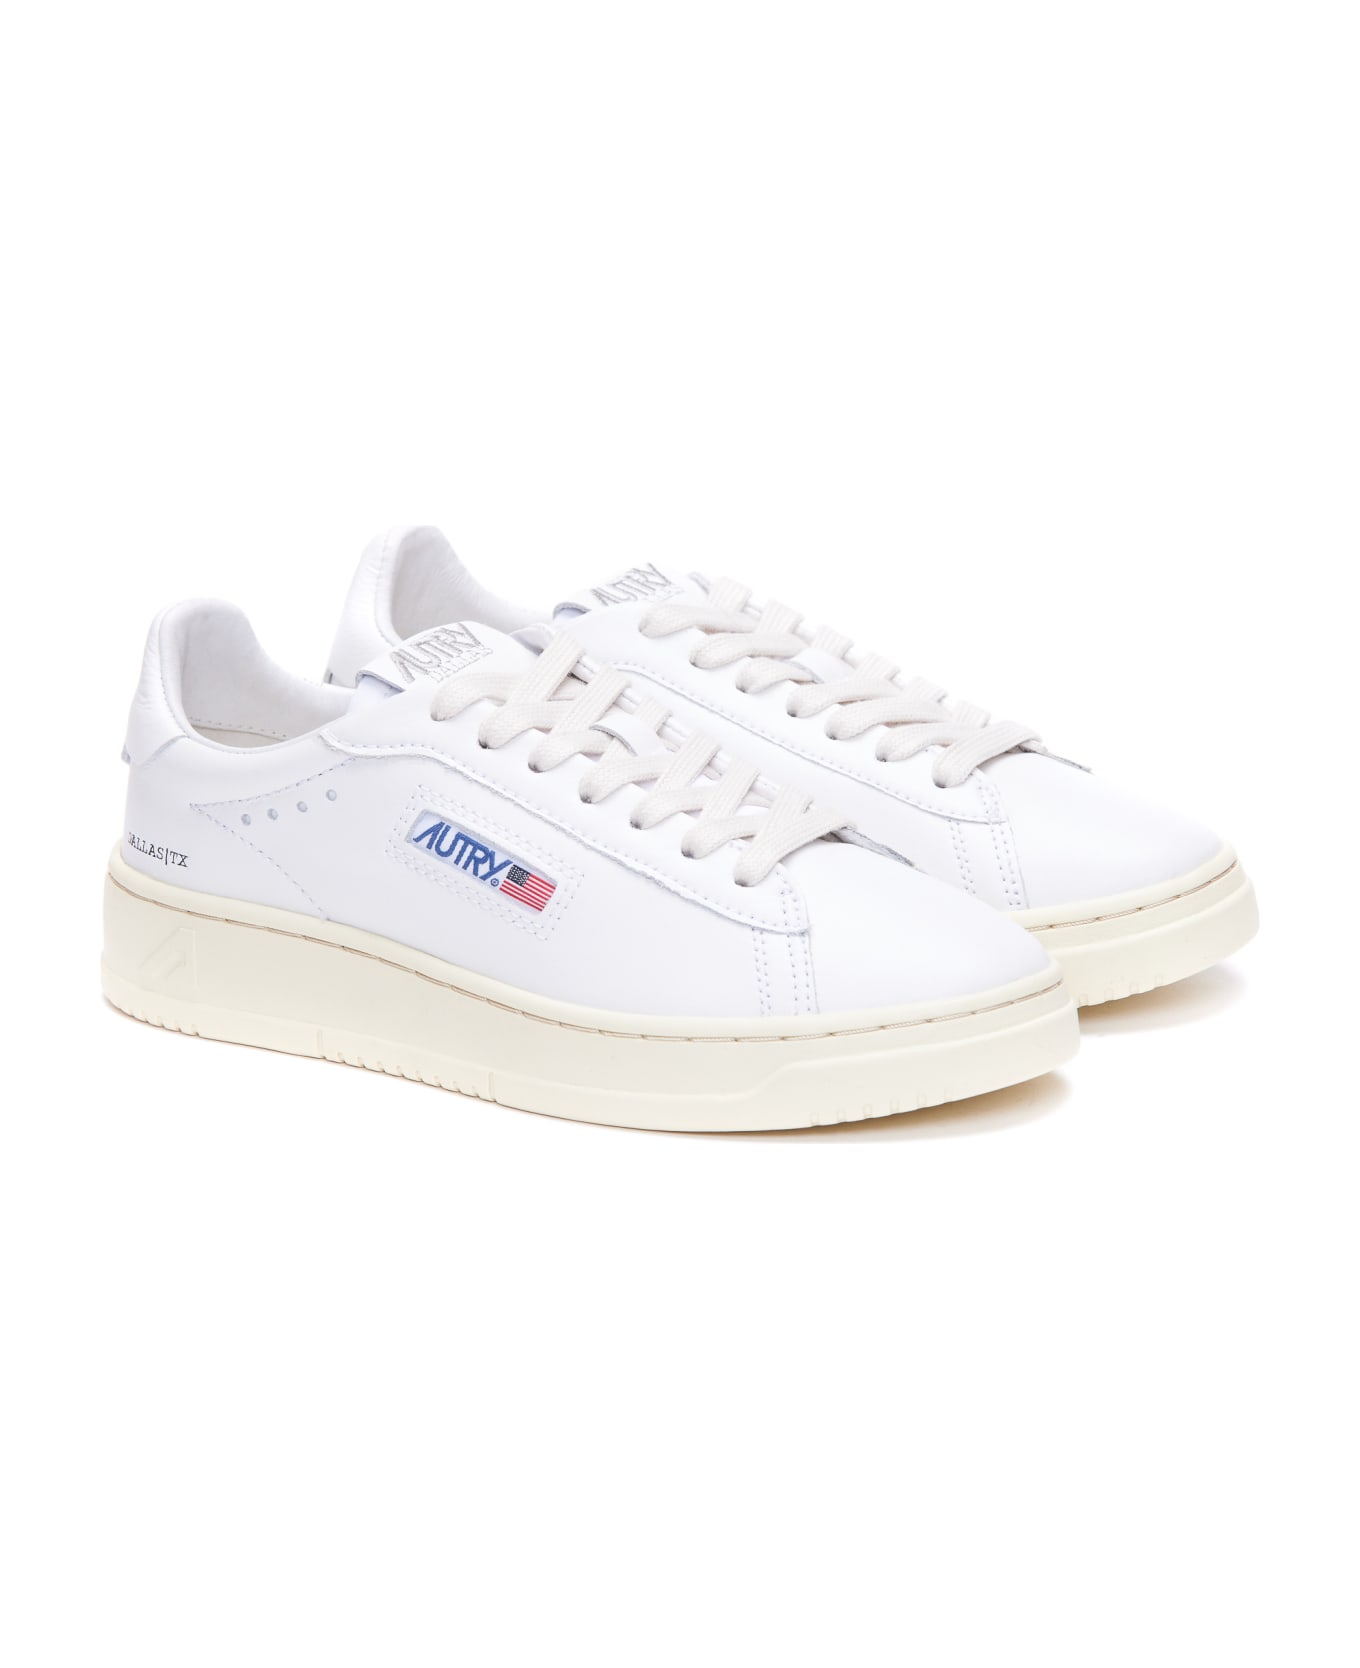 Autry Dallas Leather Sneakers - White スニーカー